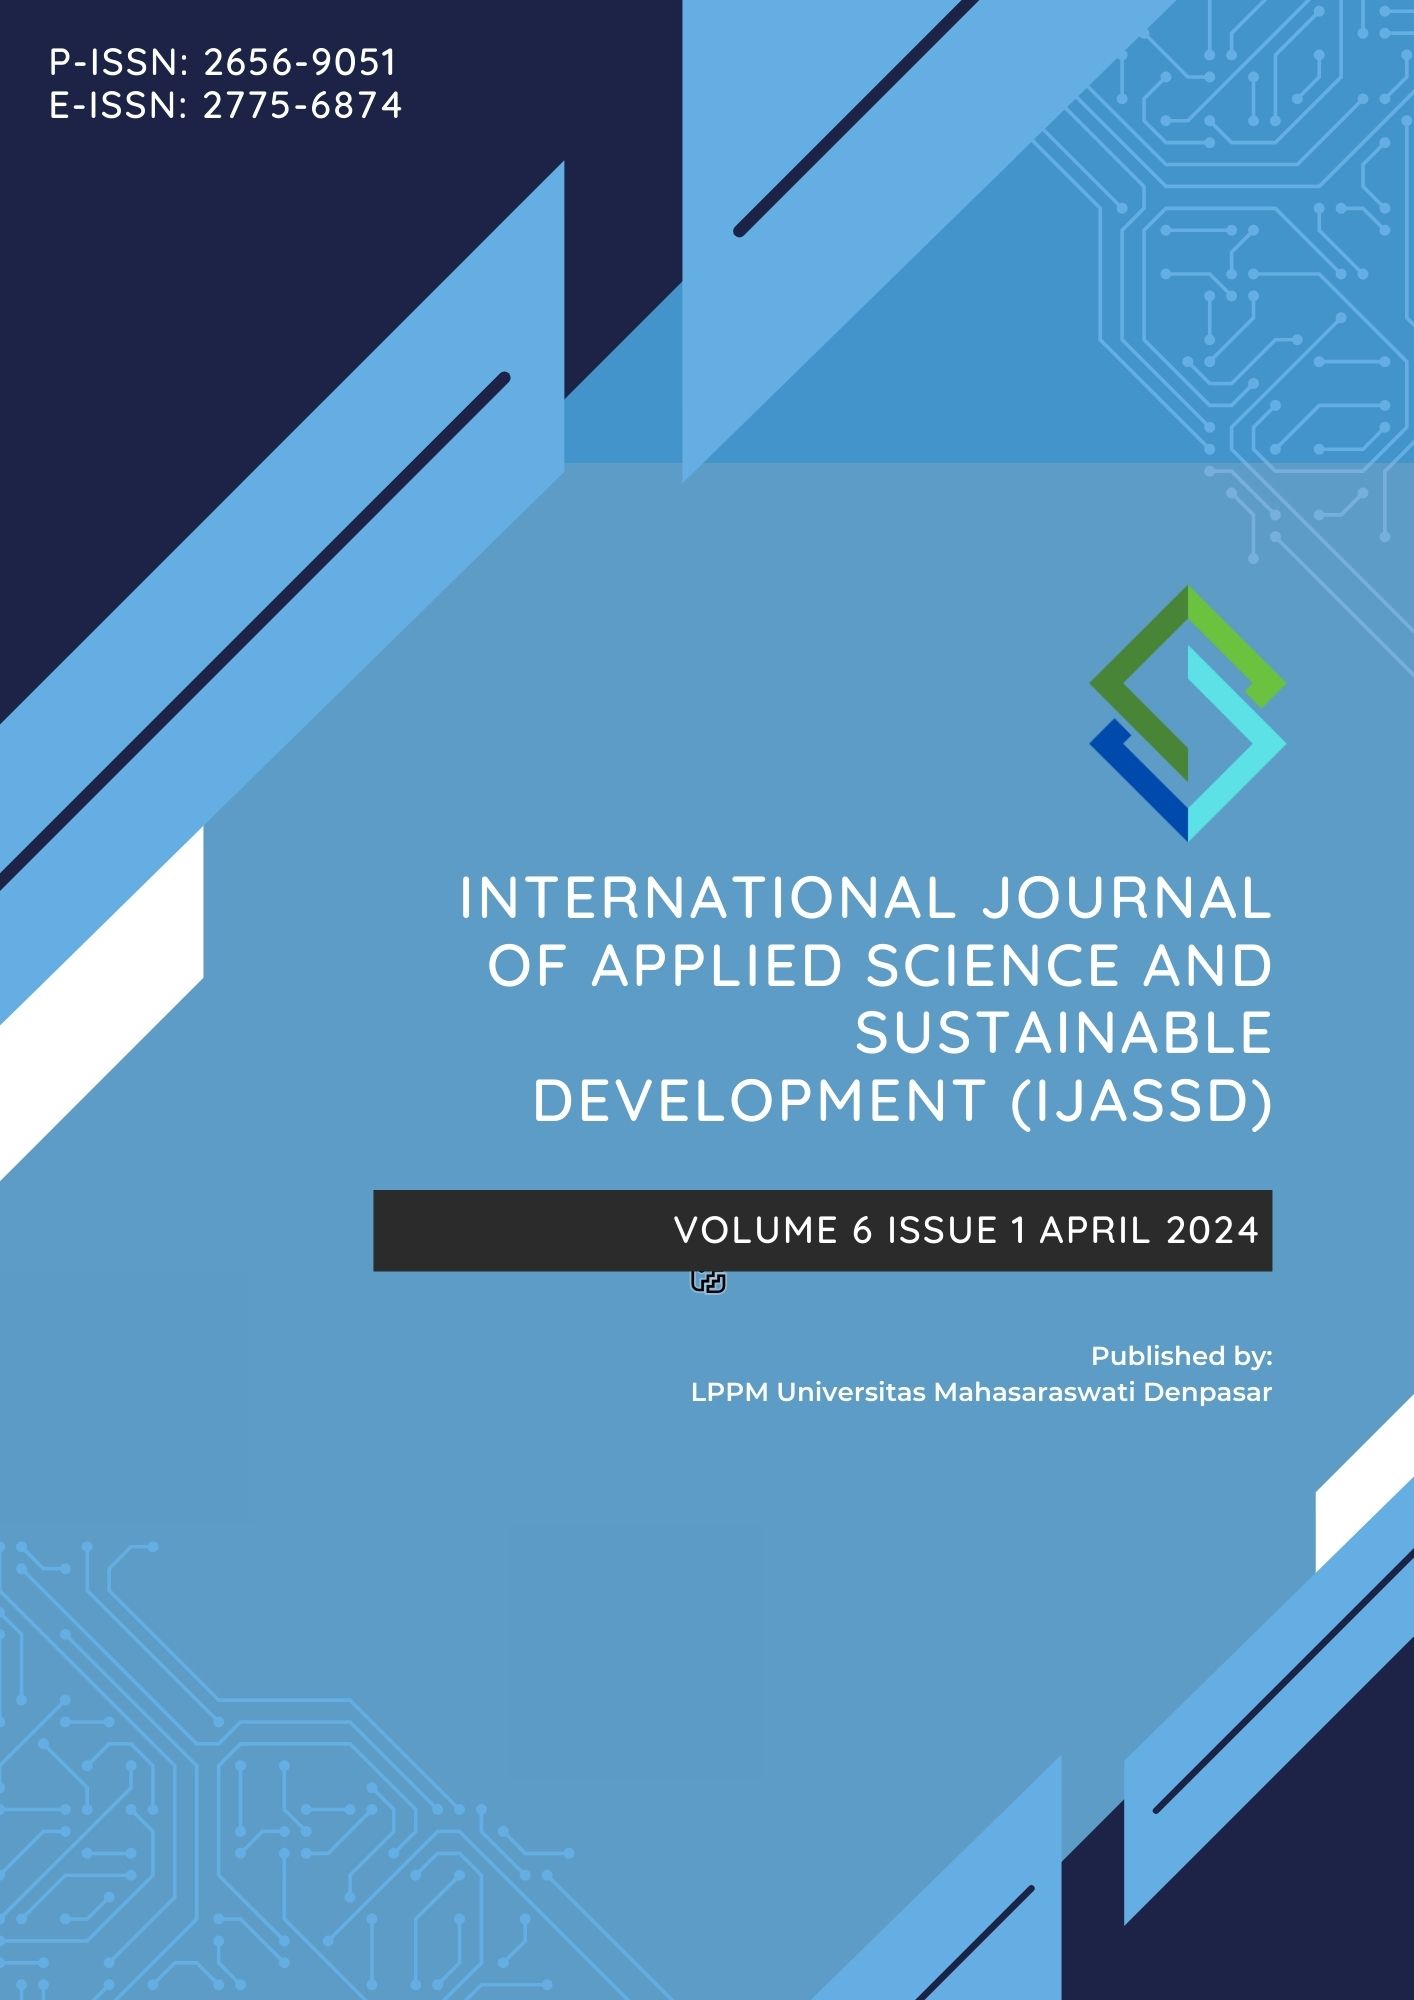 					View Vol. 6 No. 1 (2024): International Journal of Applied Science and Sustainable Development (IJASSD)
				